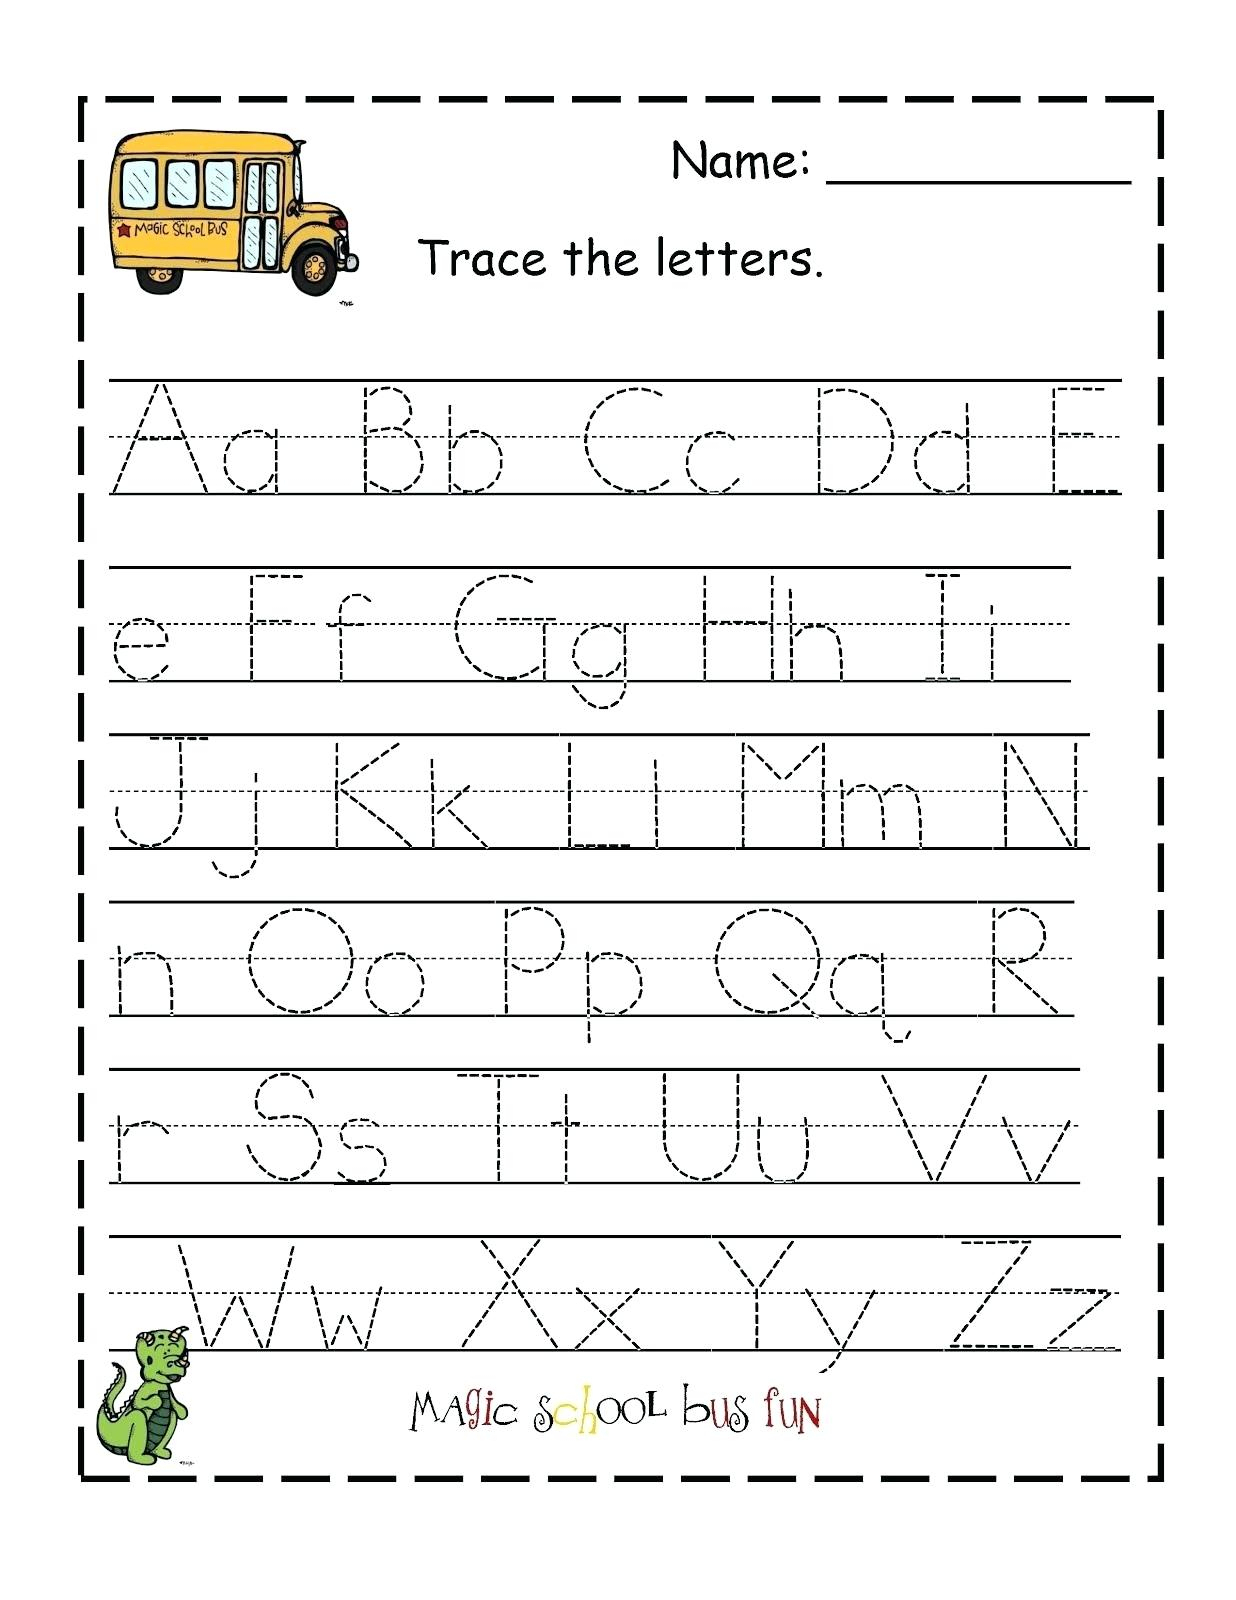 Abc Traceable Tracing Alphabet Kiddo Shelter Abc Traceable Sheets | Free Printable Preschool Worksheets Tracing Letters